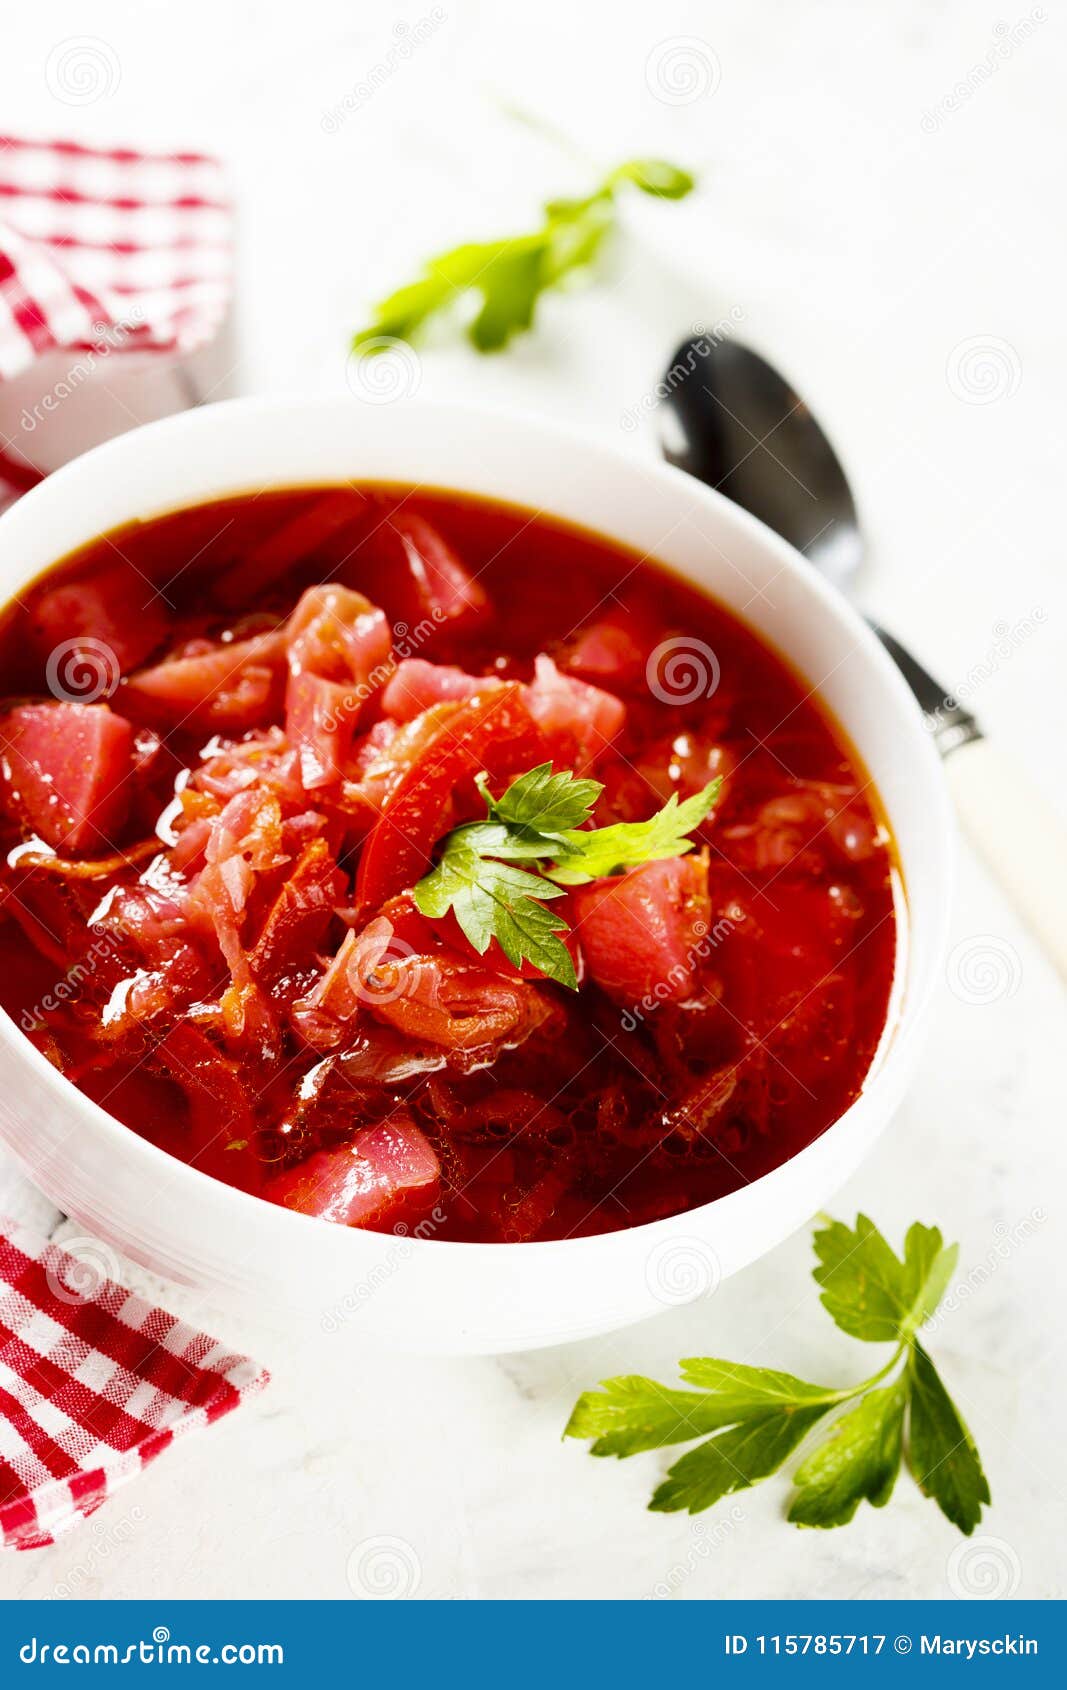 Homemade Beetroot Soup with Fresh Parsley Stock Image - Image of bright ...